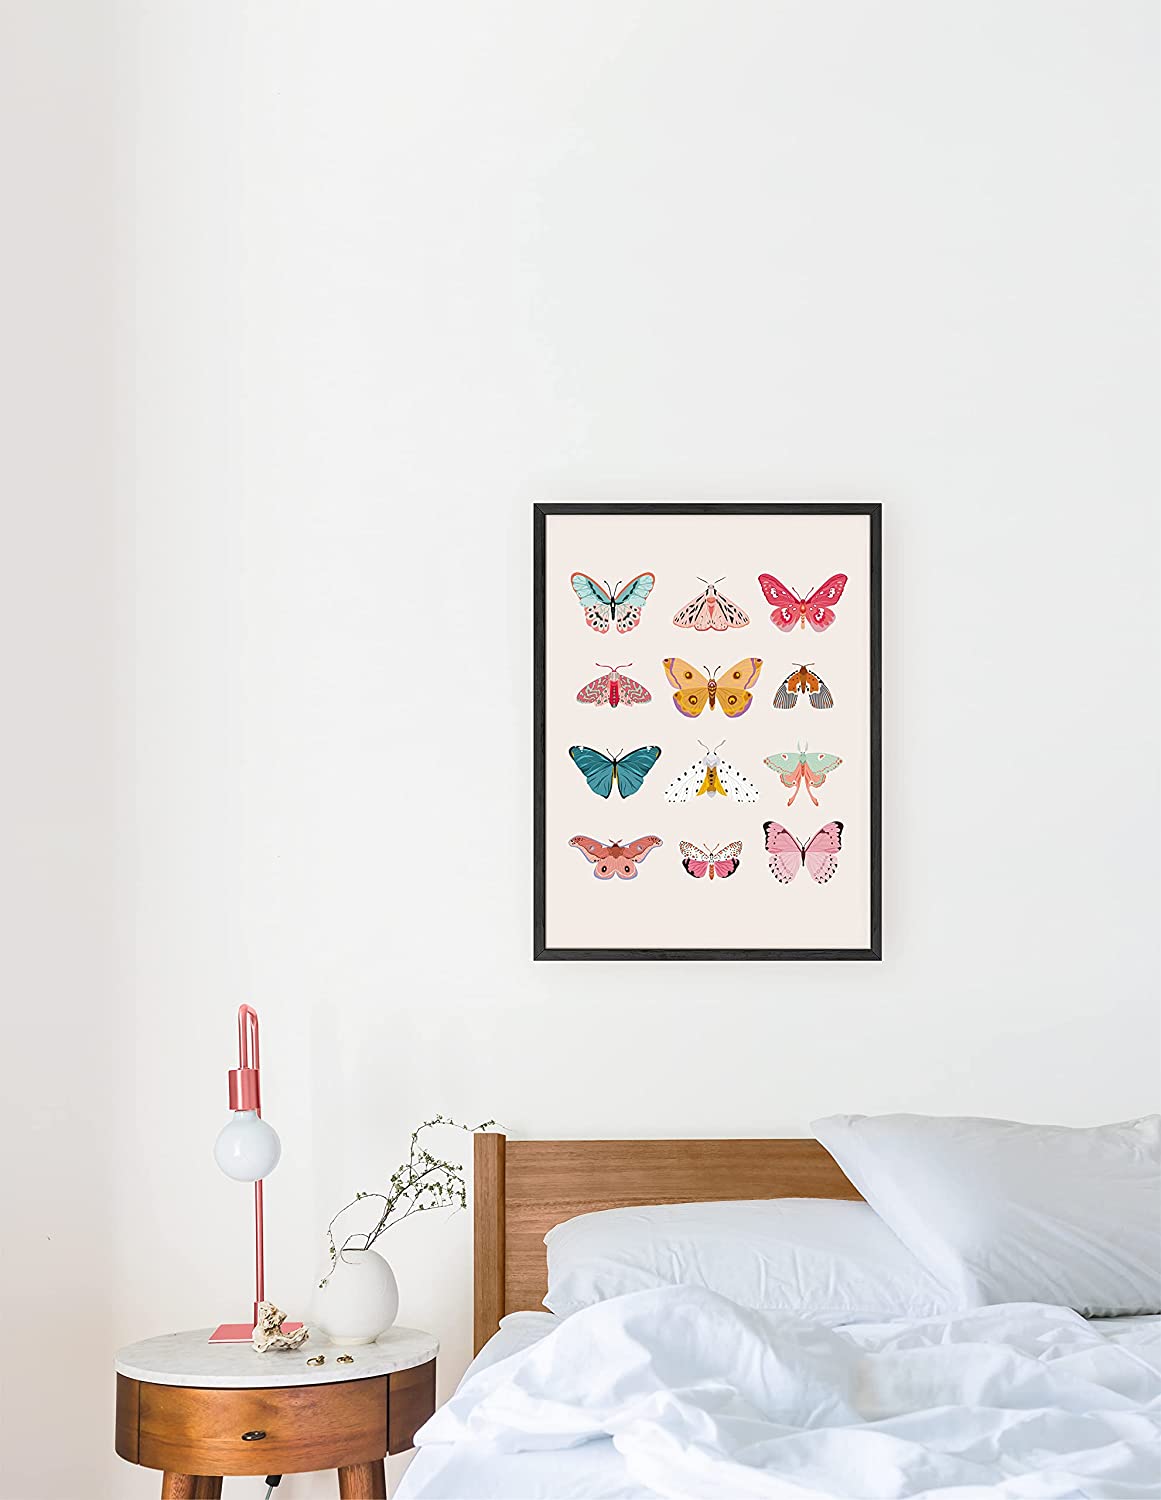 Haus and Hues Vintage Butterfly Posters  Butterfly Prints Butterfly  Poster Vintage Butterfly Art Wall Decor Butterfly Art Prints 12x16 